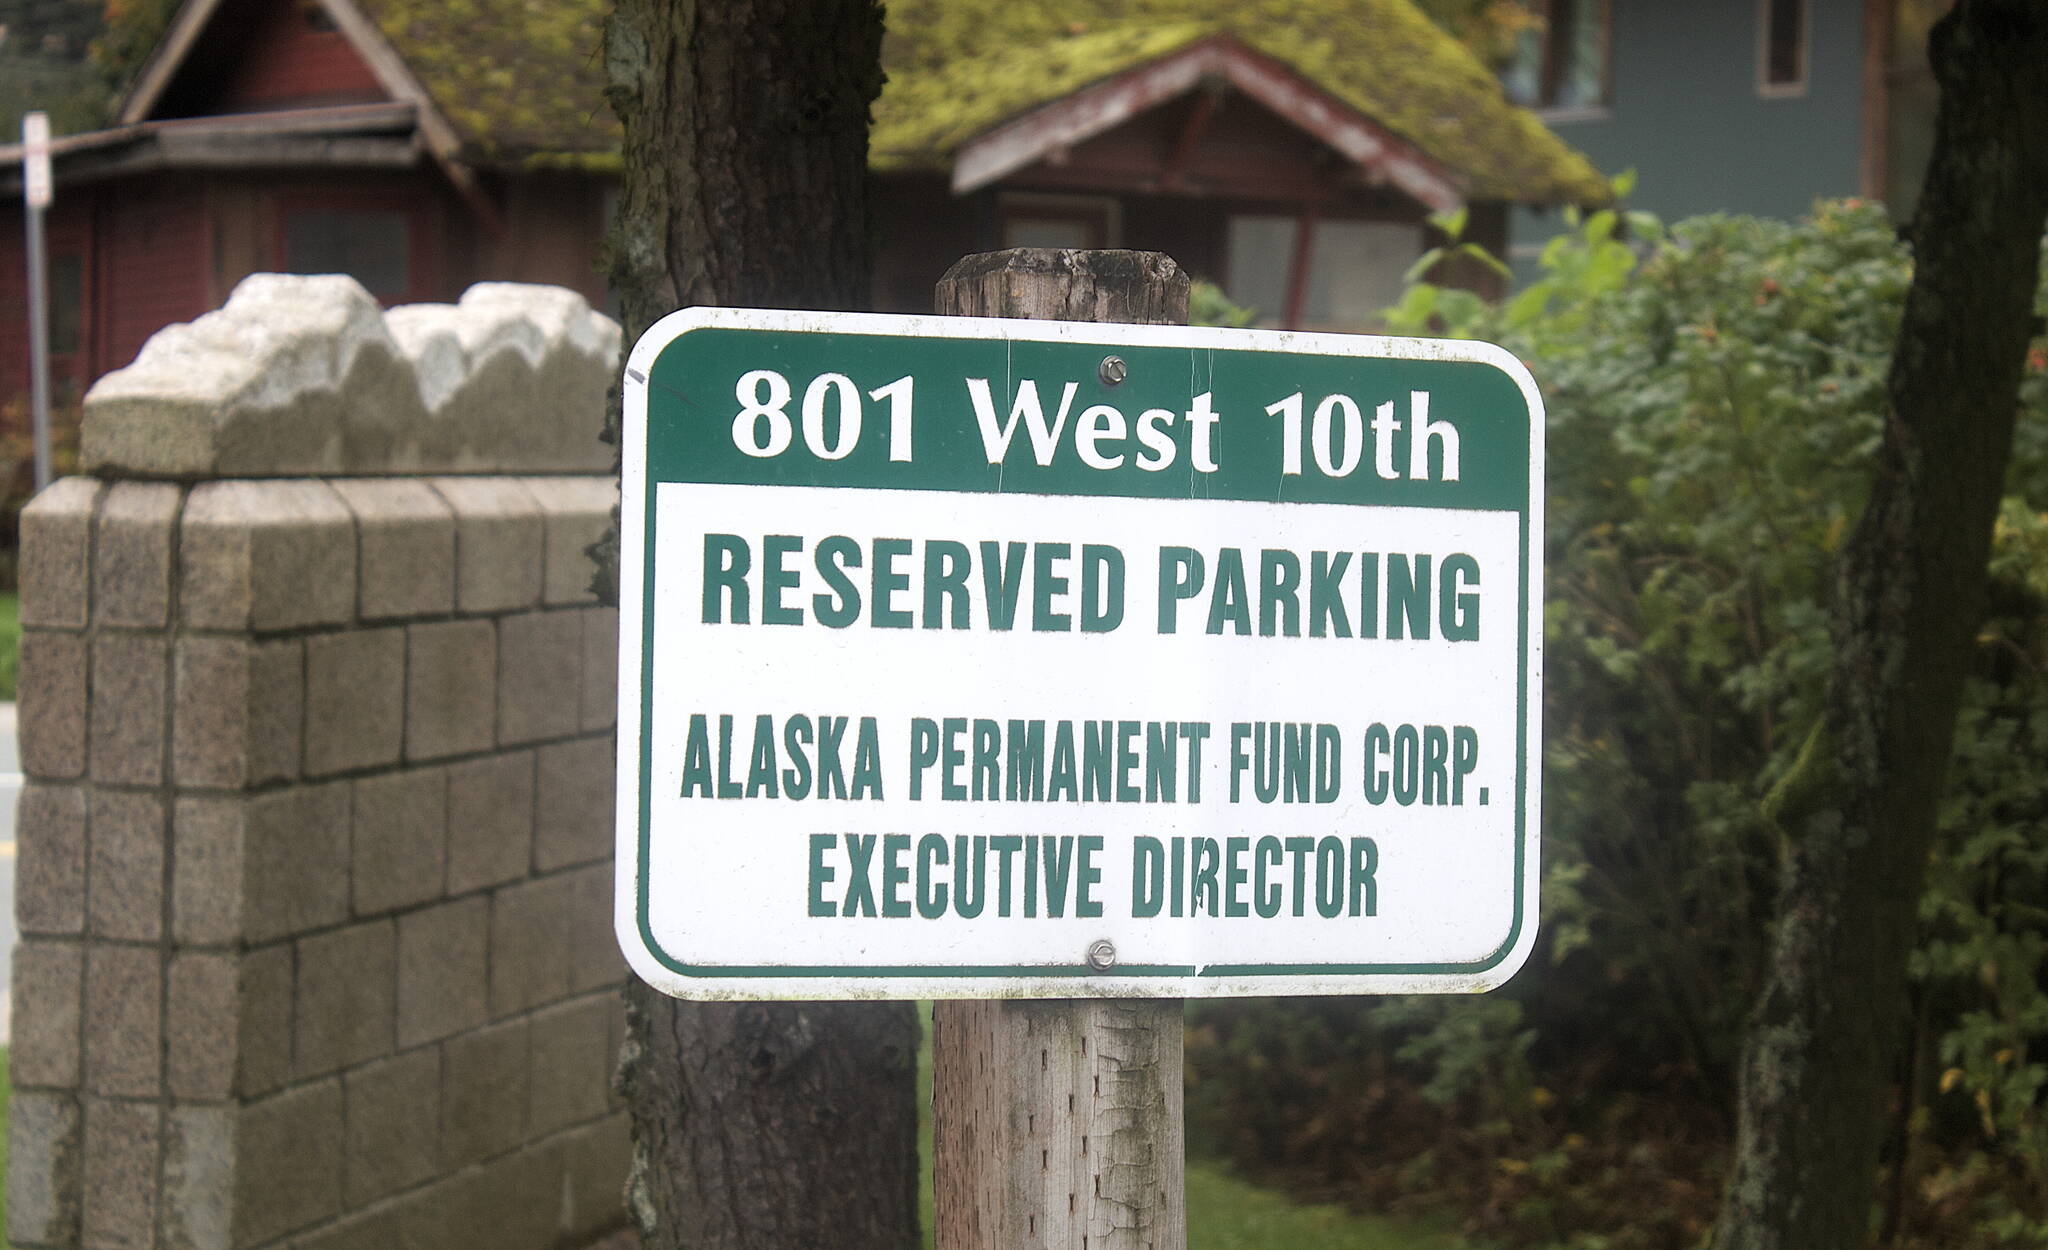 A parking sign awaits the new executive director of the Alaska Permanent Fund at its Juneau headquarters, Three finalists will be interviewed for the job during a public meeting Monday by the fund’s board of trustees, who are expected to deliberate and announce the new director immediately afterward. (Mark Sabbatini / Juneau Empire)